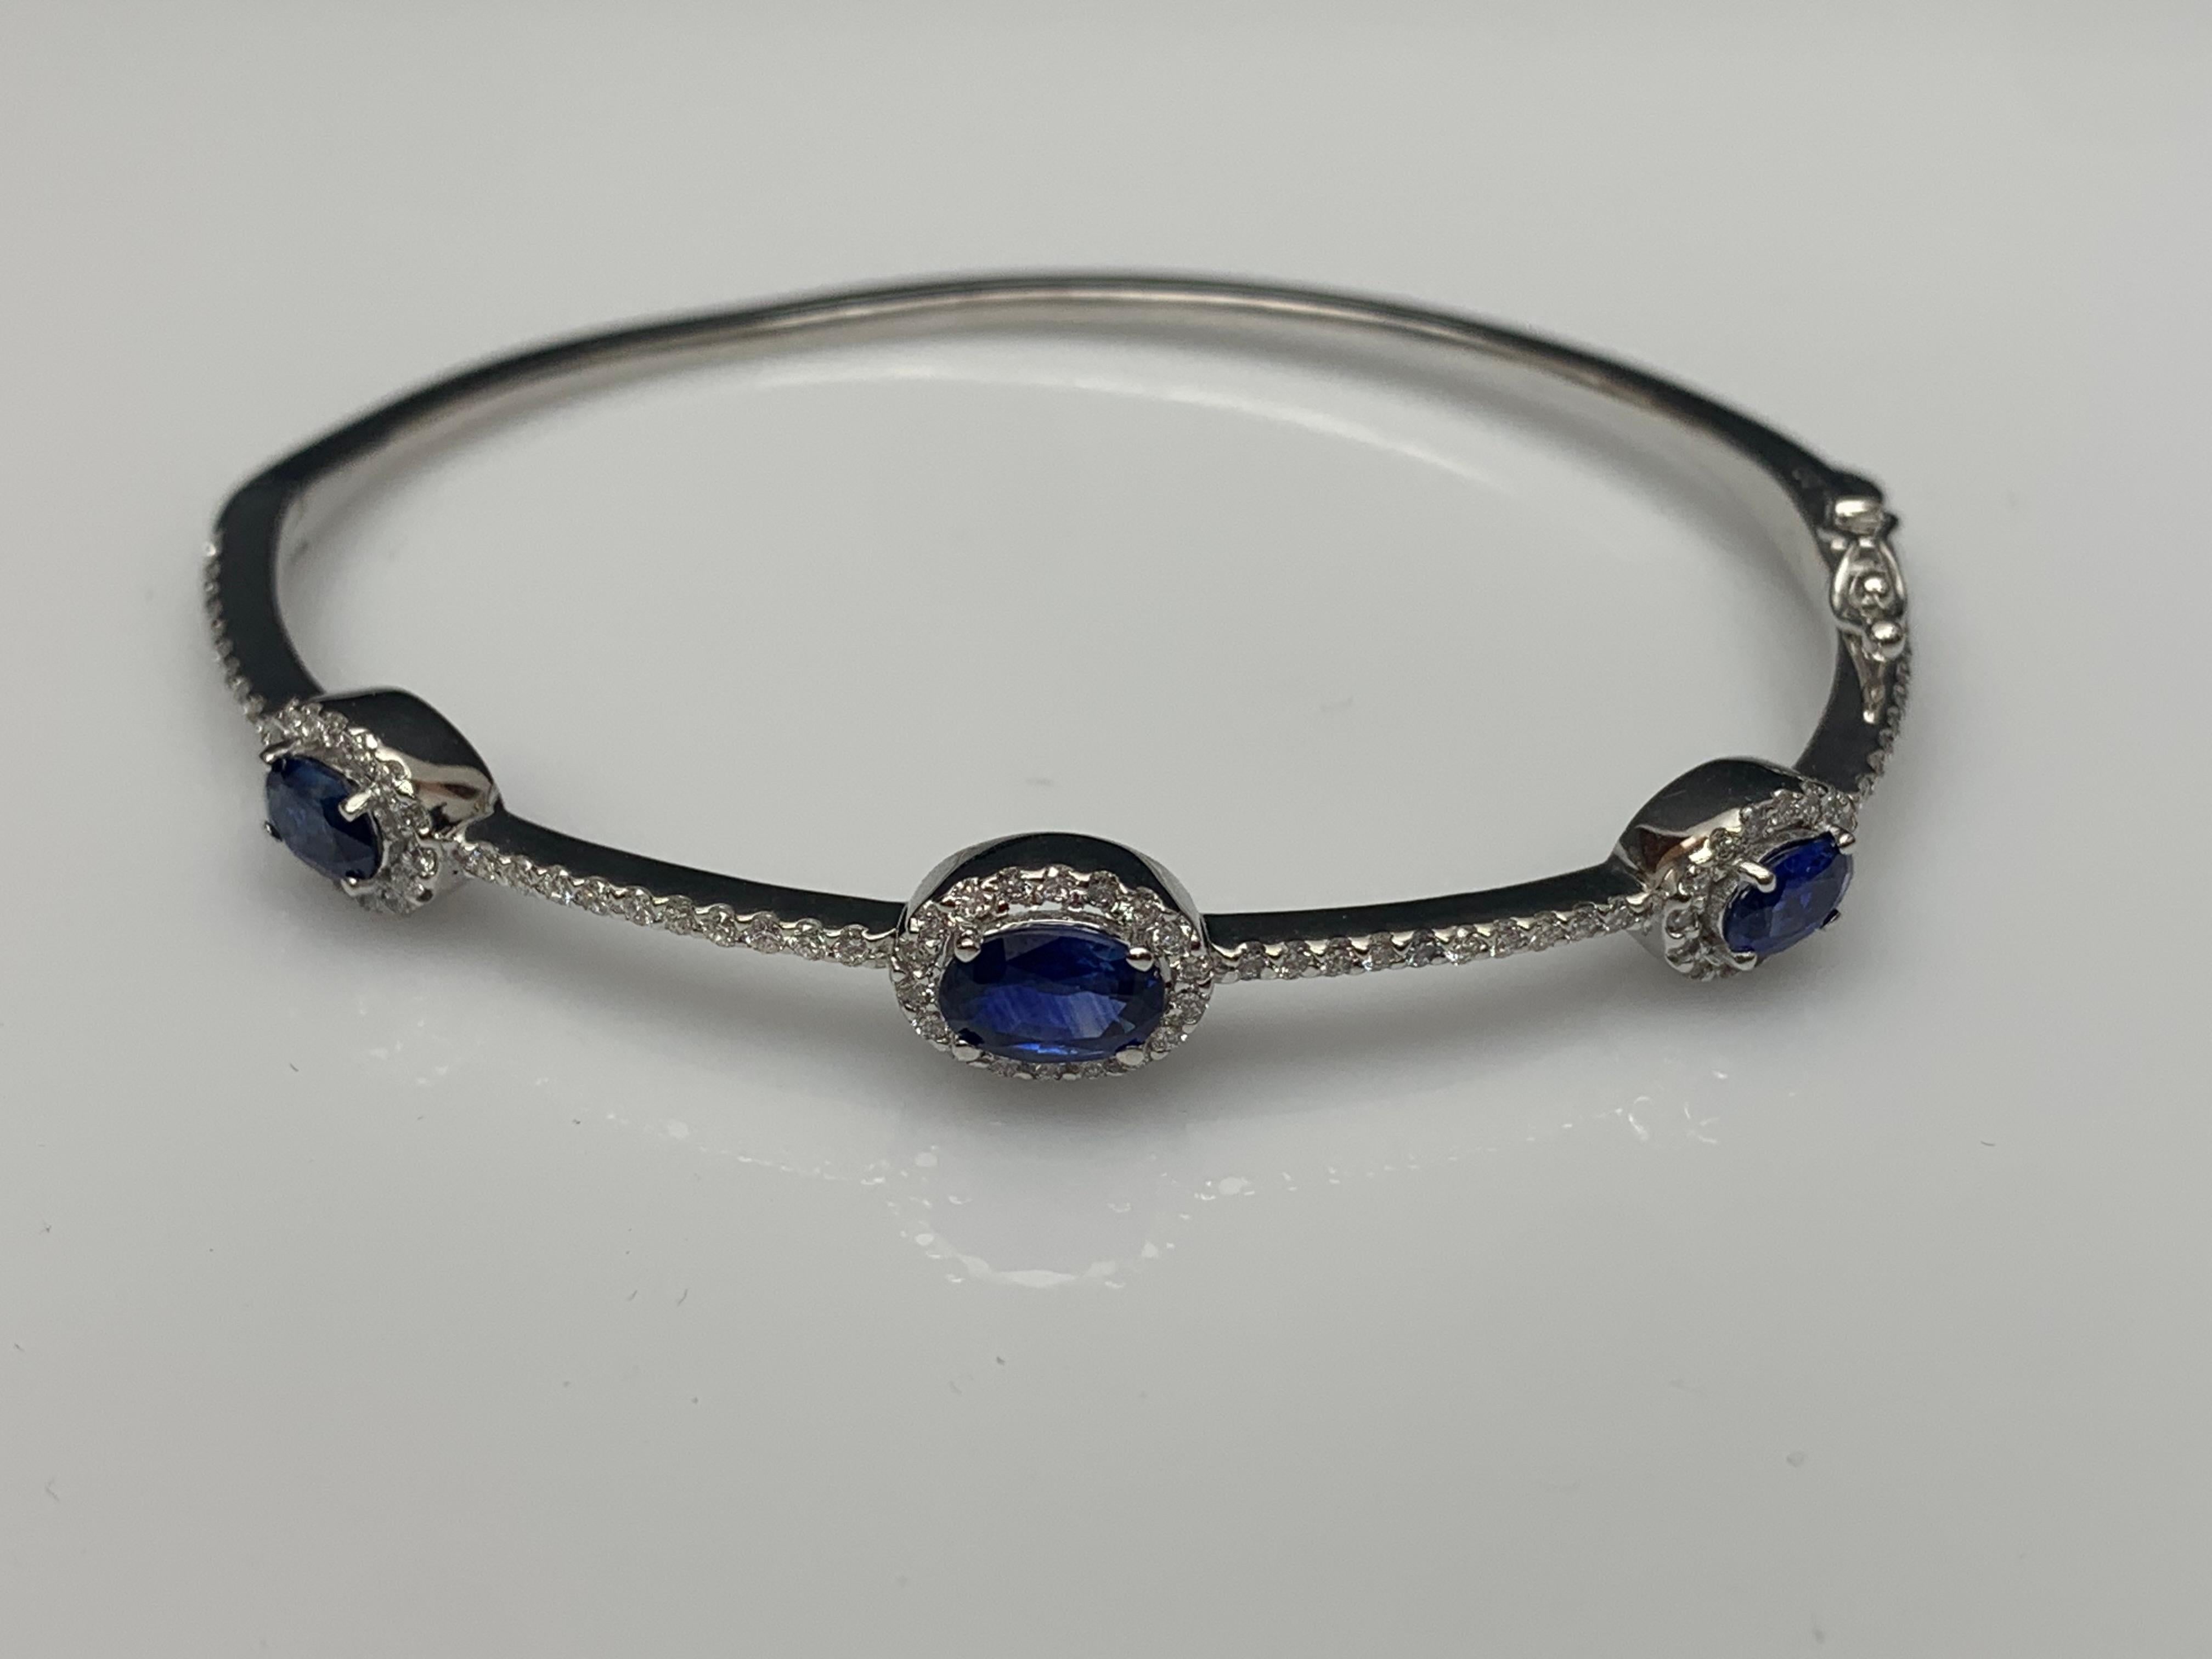 Modern 1.80 Carat Oval Cut Sapphire and Diamond Bangle Bracelet in 14K White Gold For Sale